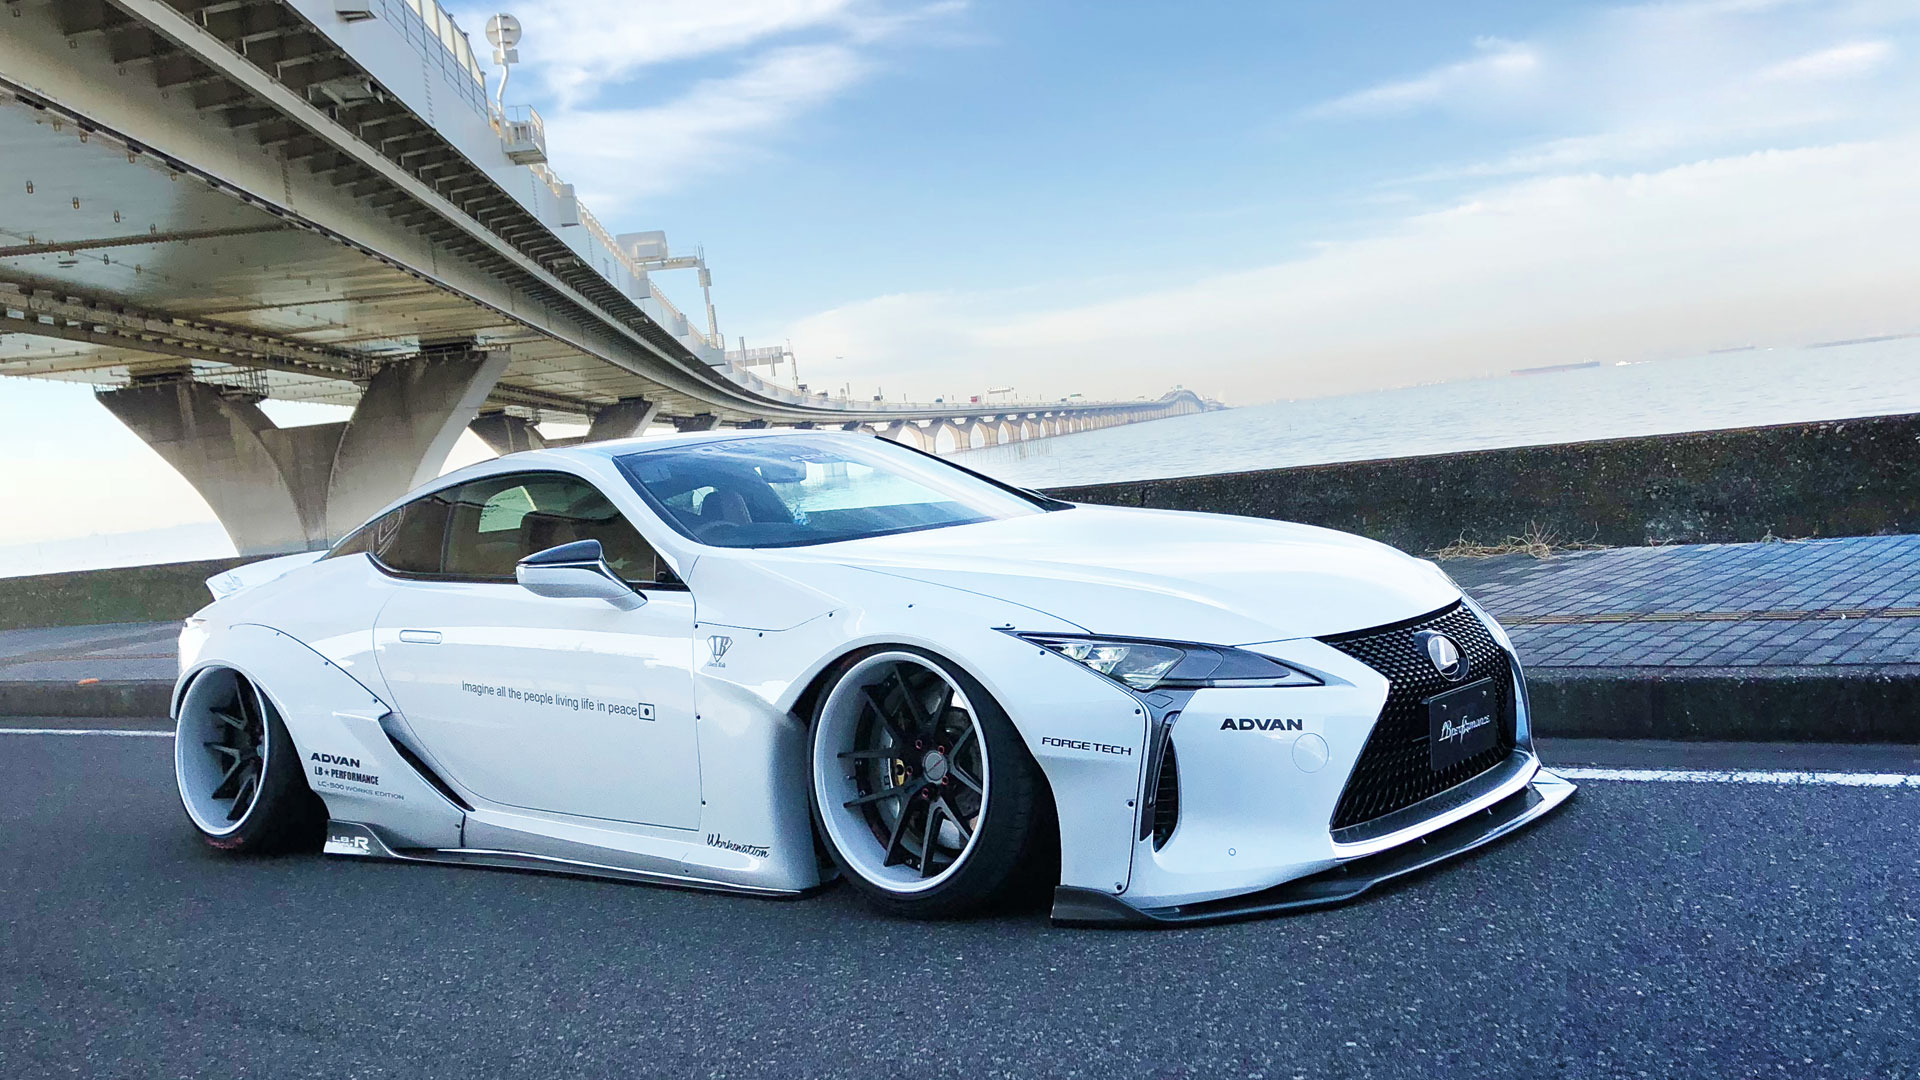 Check our price and buy Liberty Walk body kit for Lexus LC500!